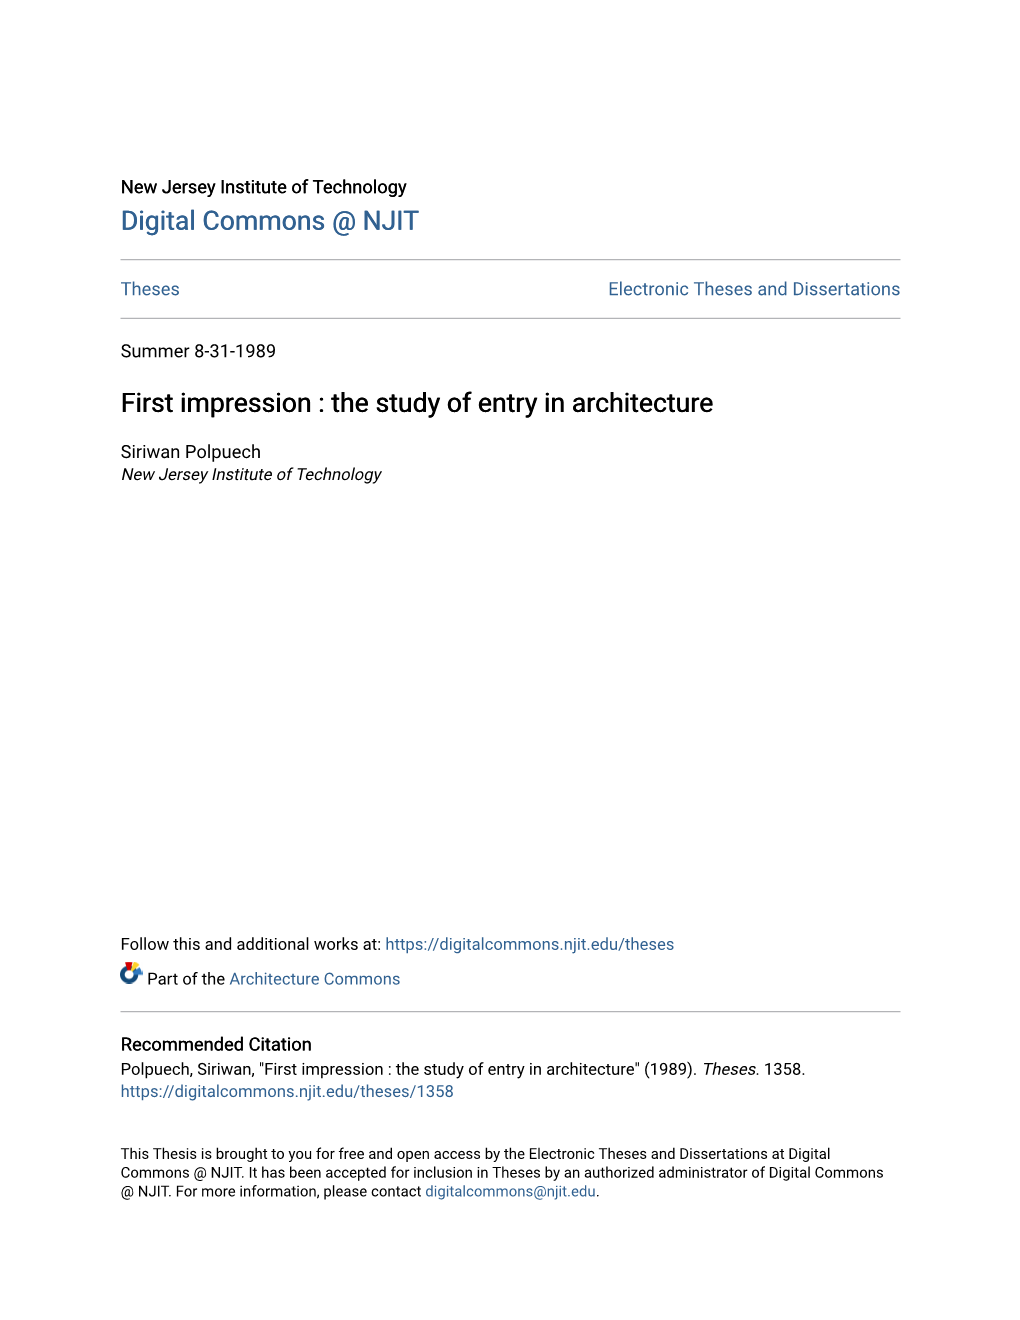 First Impression : the Study of Entry in Architecture